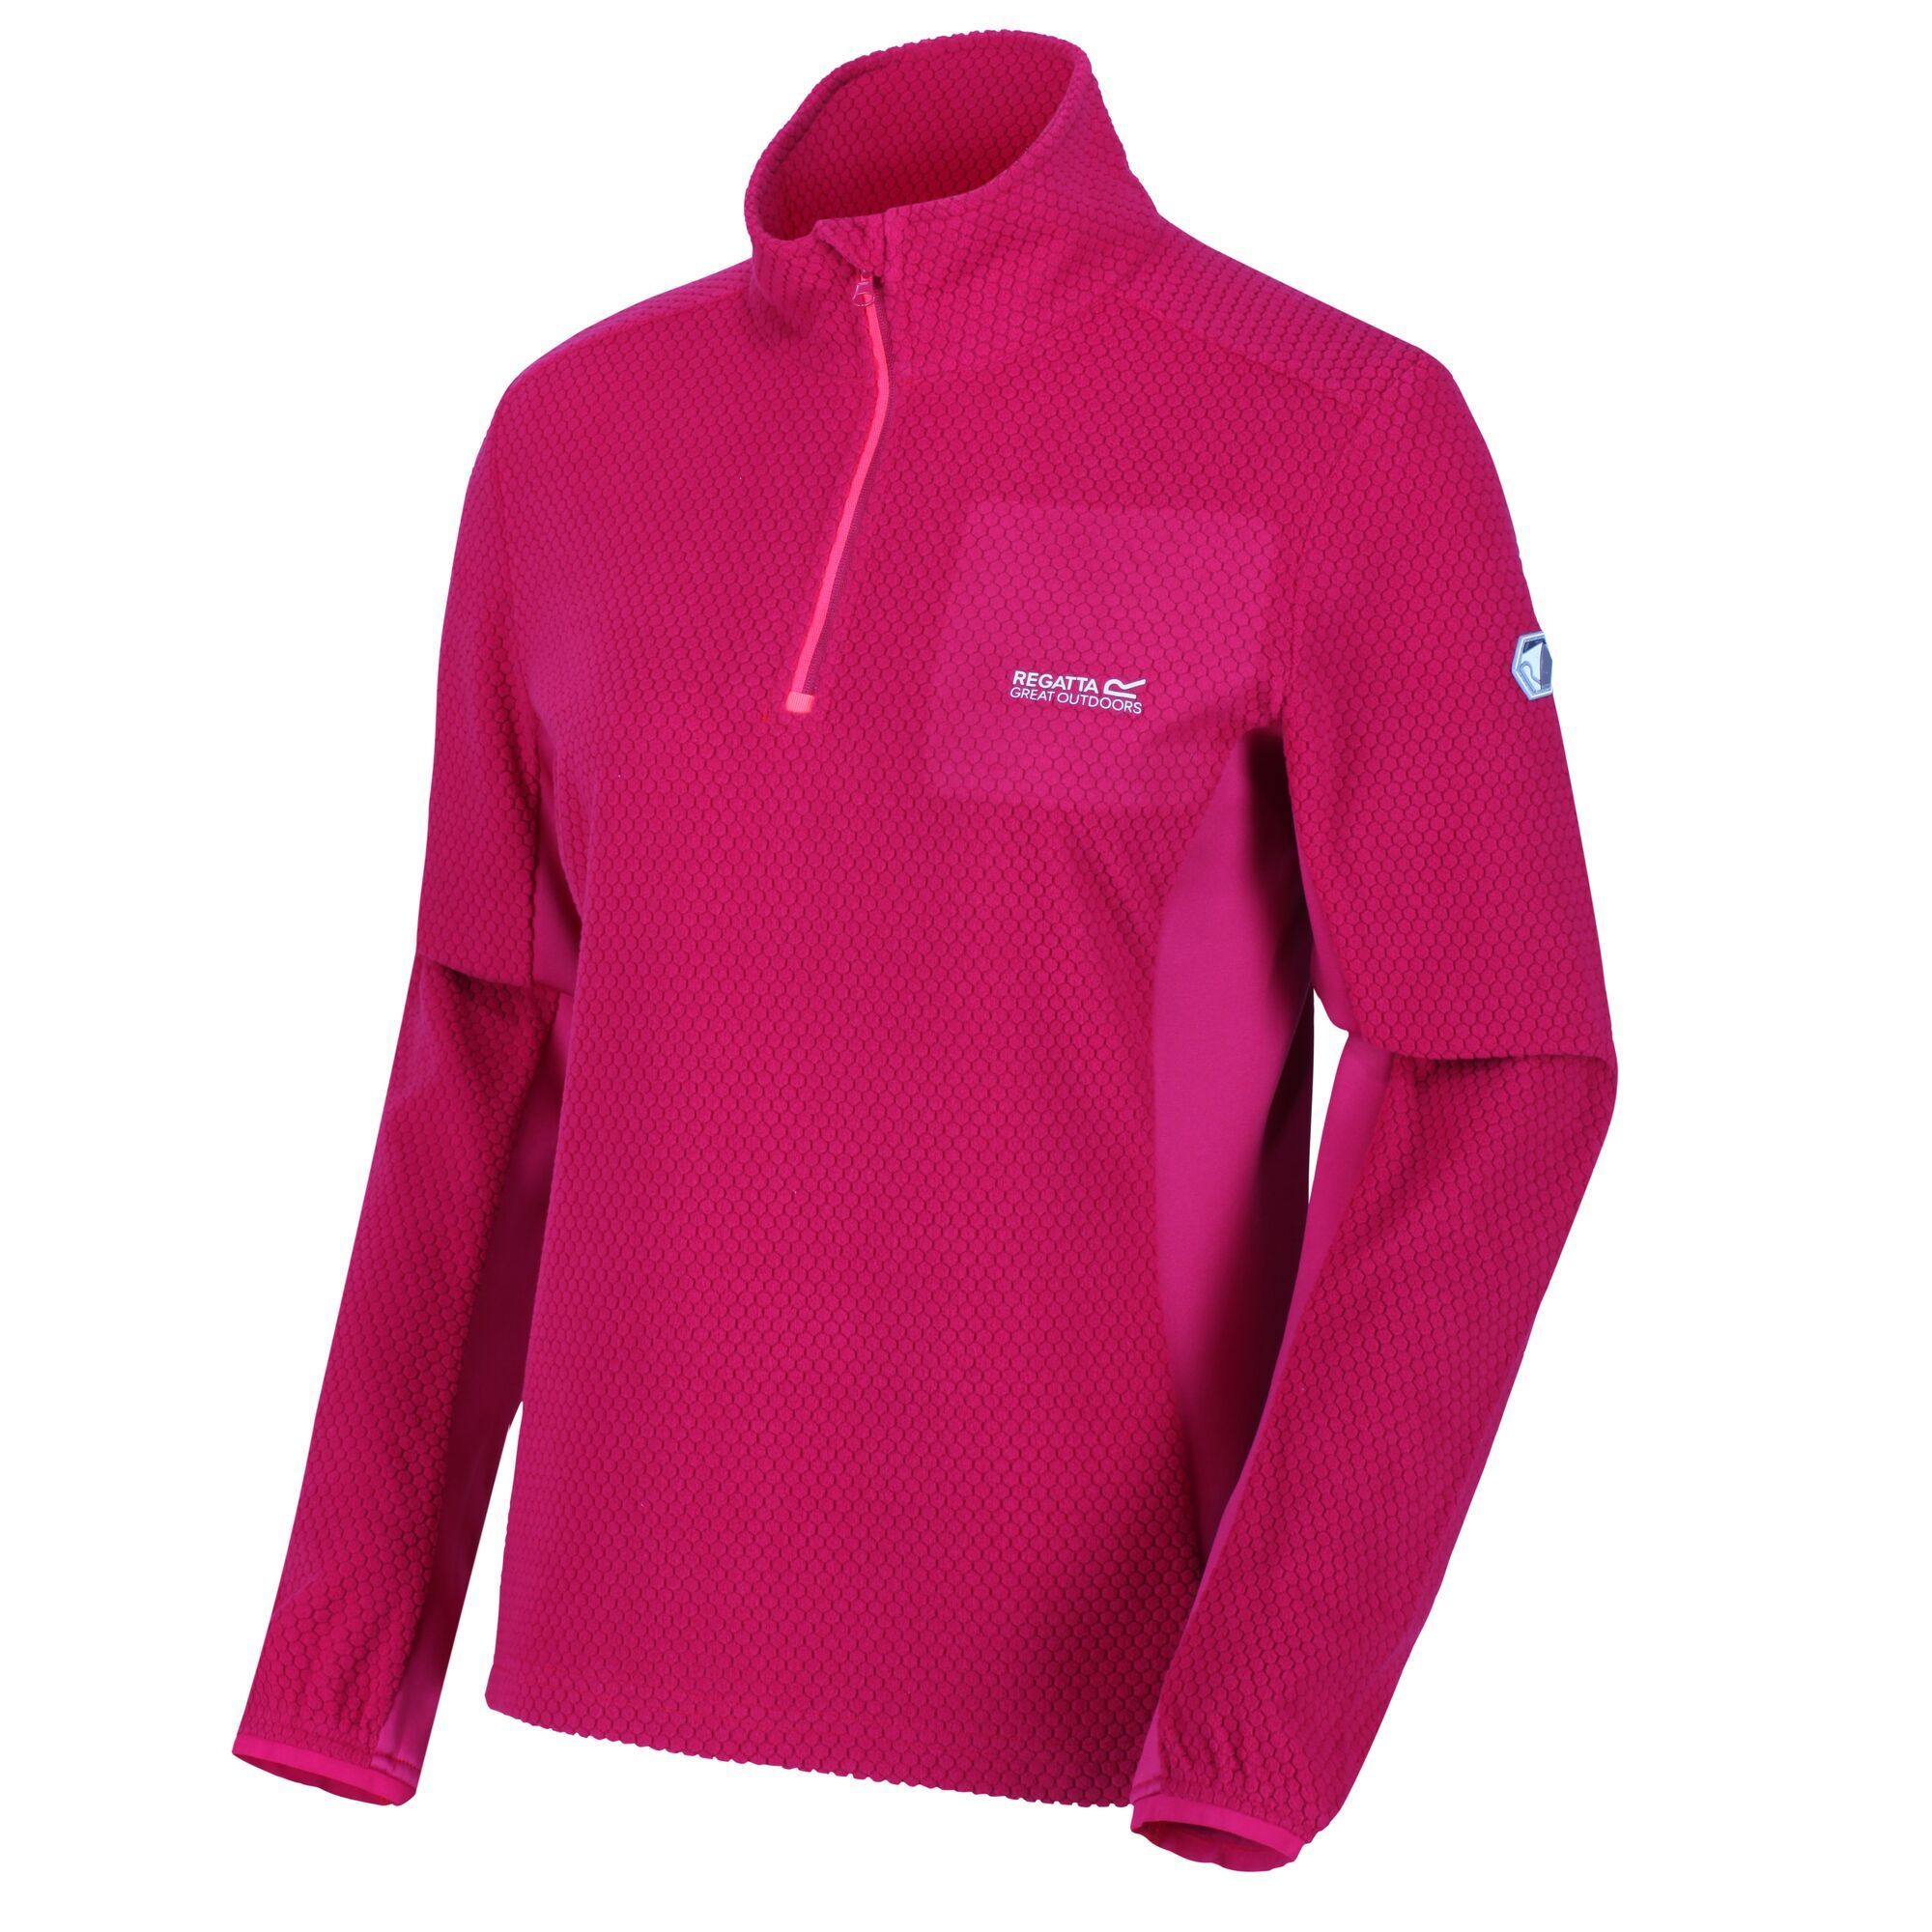 100% polyester honeycomb embossed fleece. Breeze-blocking stand collar with a venting zip. Stretch binding to cuffs. With the Regatta embroidery on the chest. Size/Bust (ins) (8 - 32in), (10 - 34in), (12 - 36in), (14 - 38in), (16 - 40in), (18 - 42in), (20 - 44in).